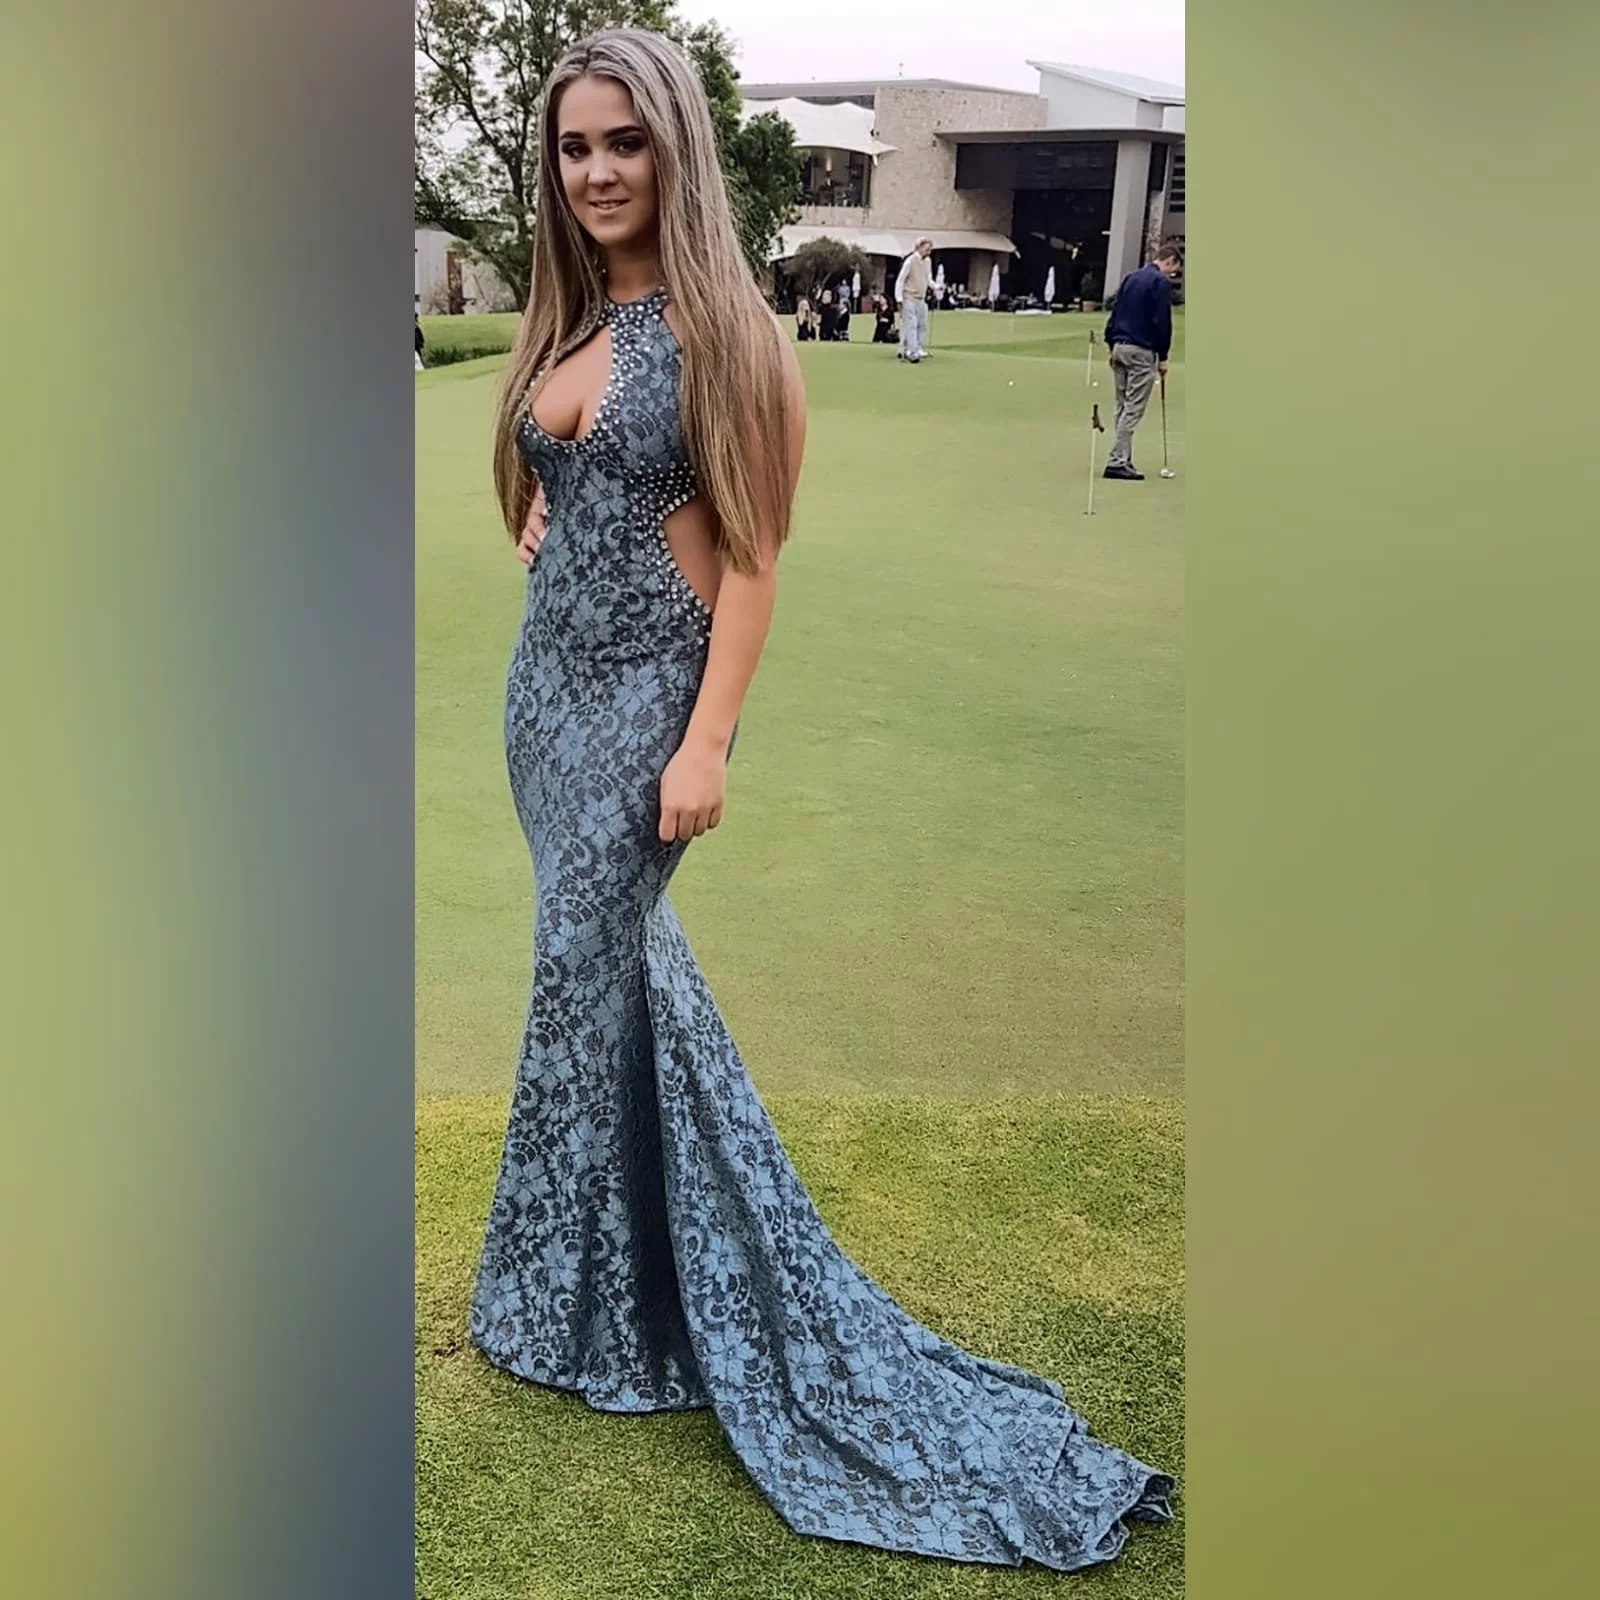 Choker grey fully laced long matric farewell dress 1 grey fully laced long matric farewell dress with a choker neckline and a cleavage opening and side tummy openings with a train. Detailed with silver beads.